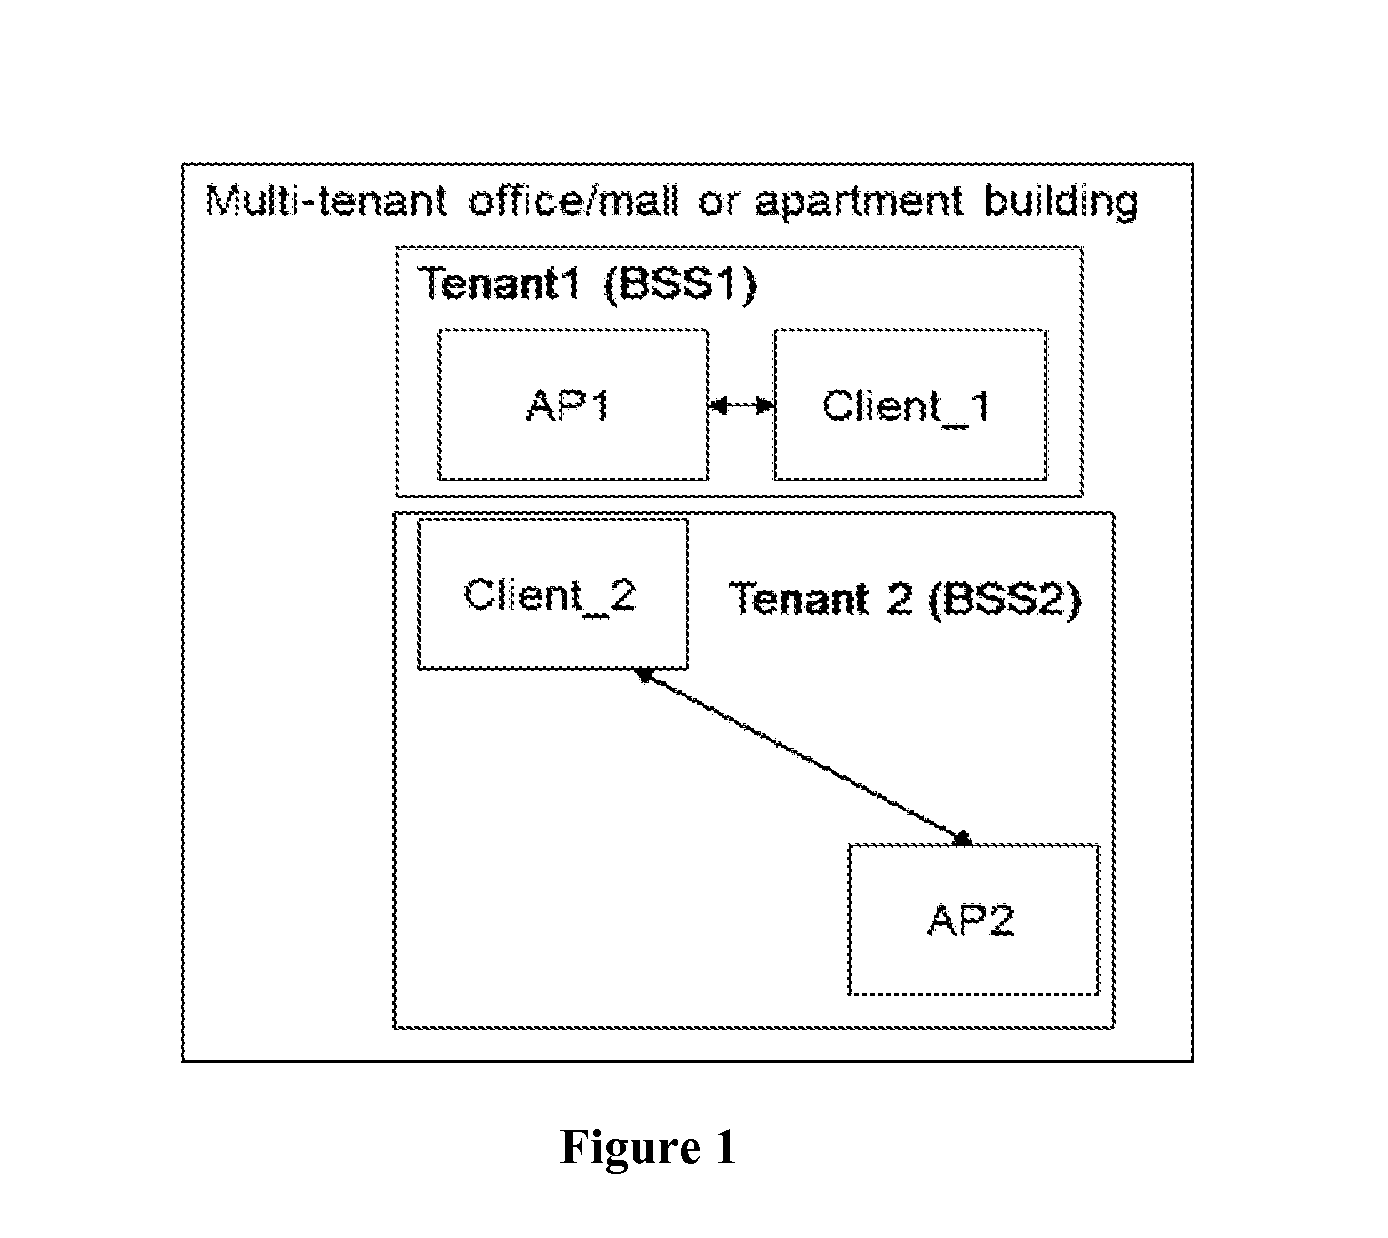 Dynamic cca for increasing system throughput of a WLAN network